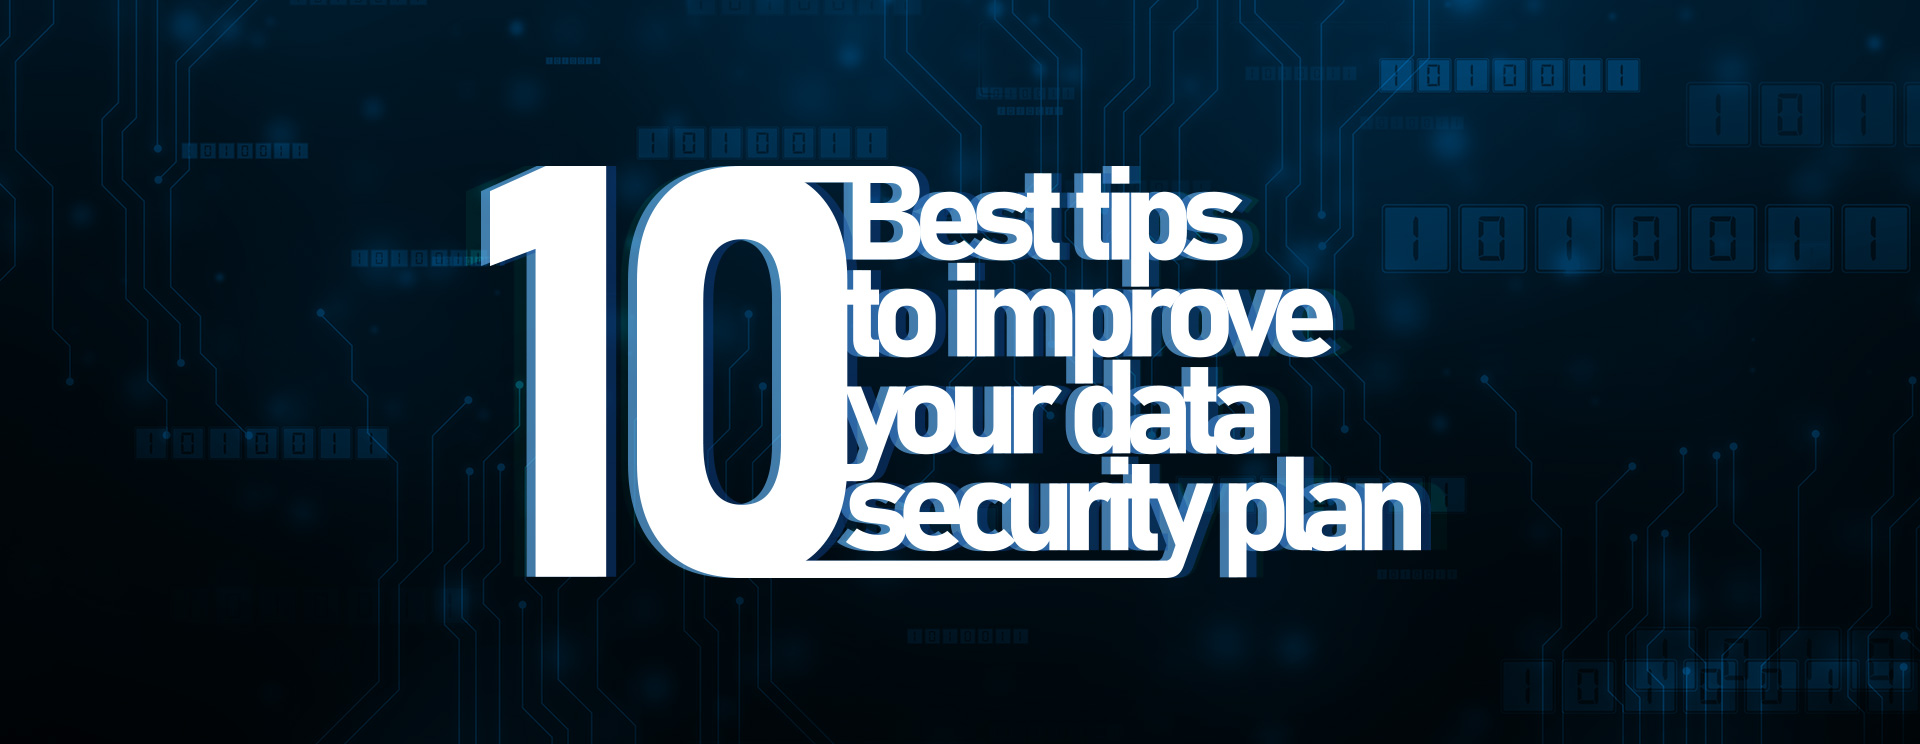 10 Best Tips to Improve Your Data Security Plan